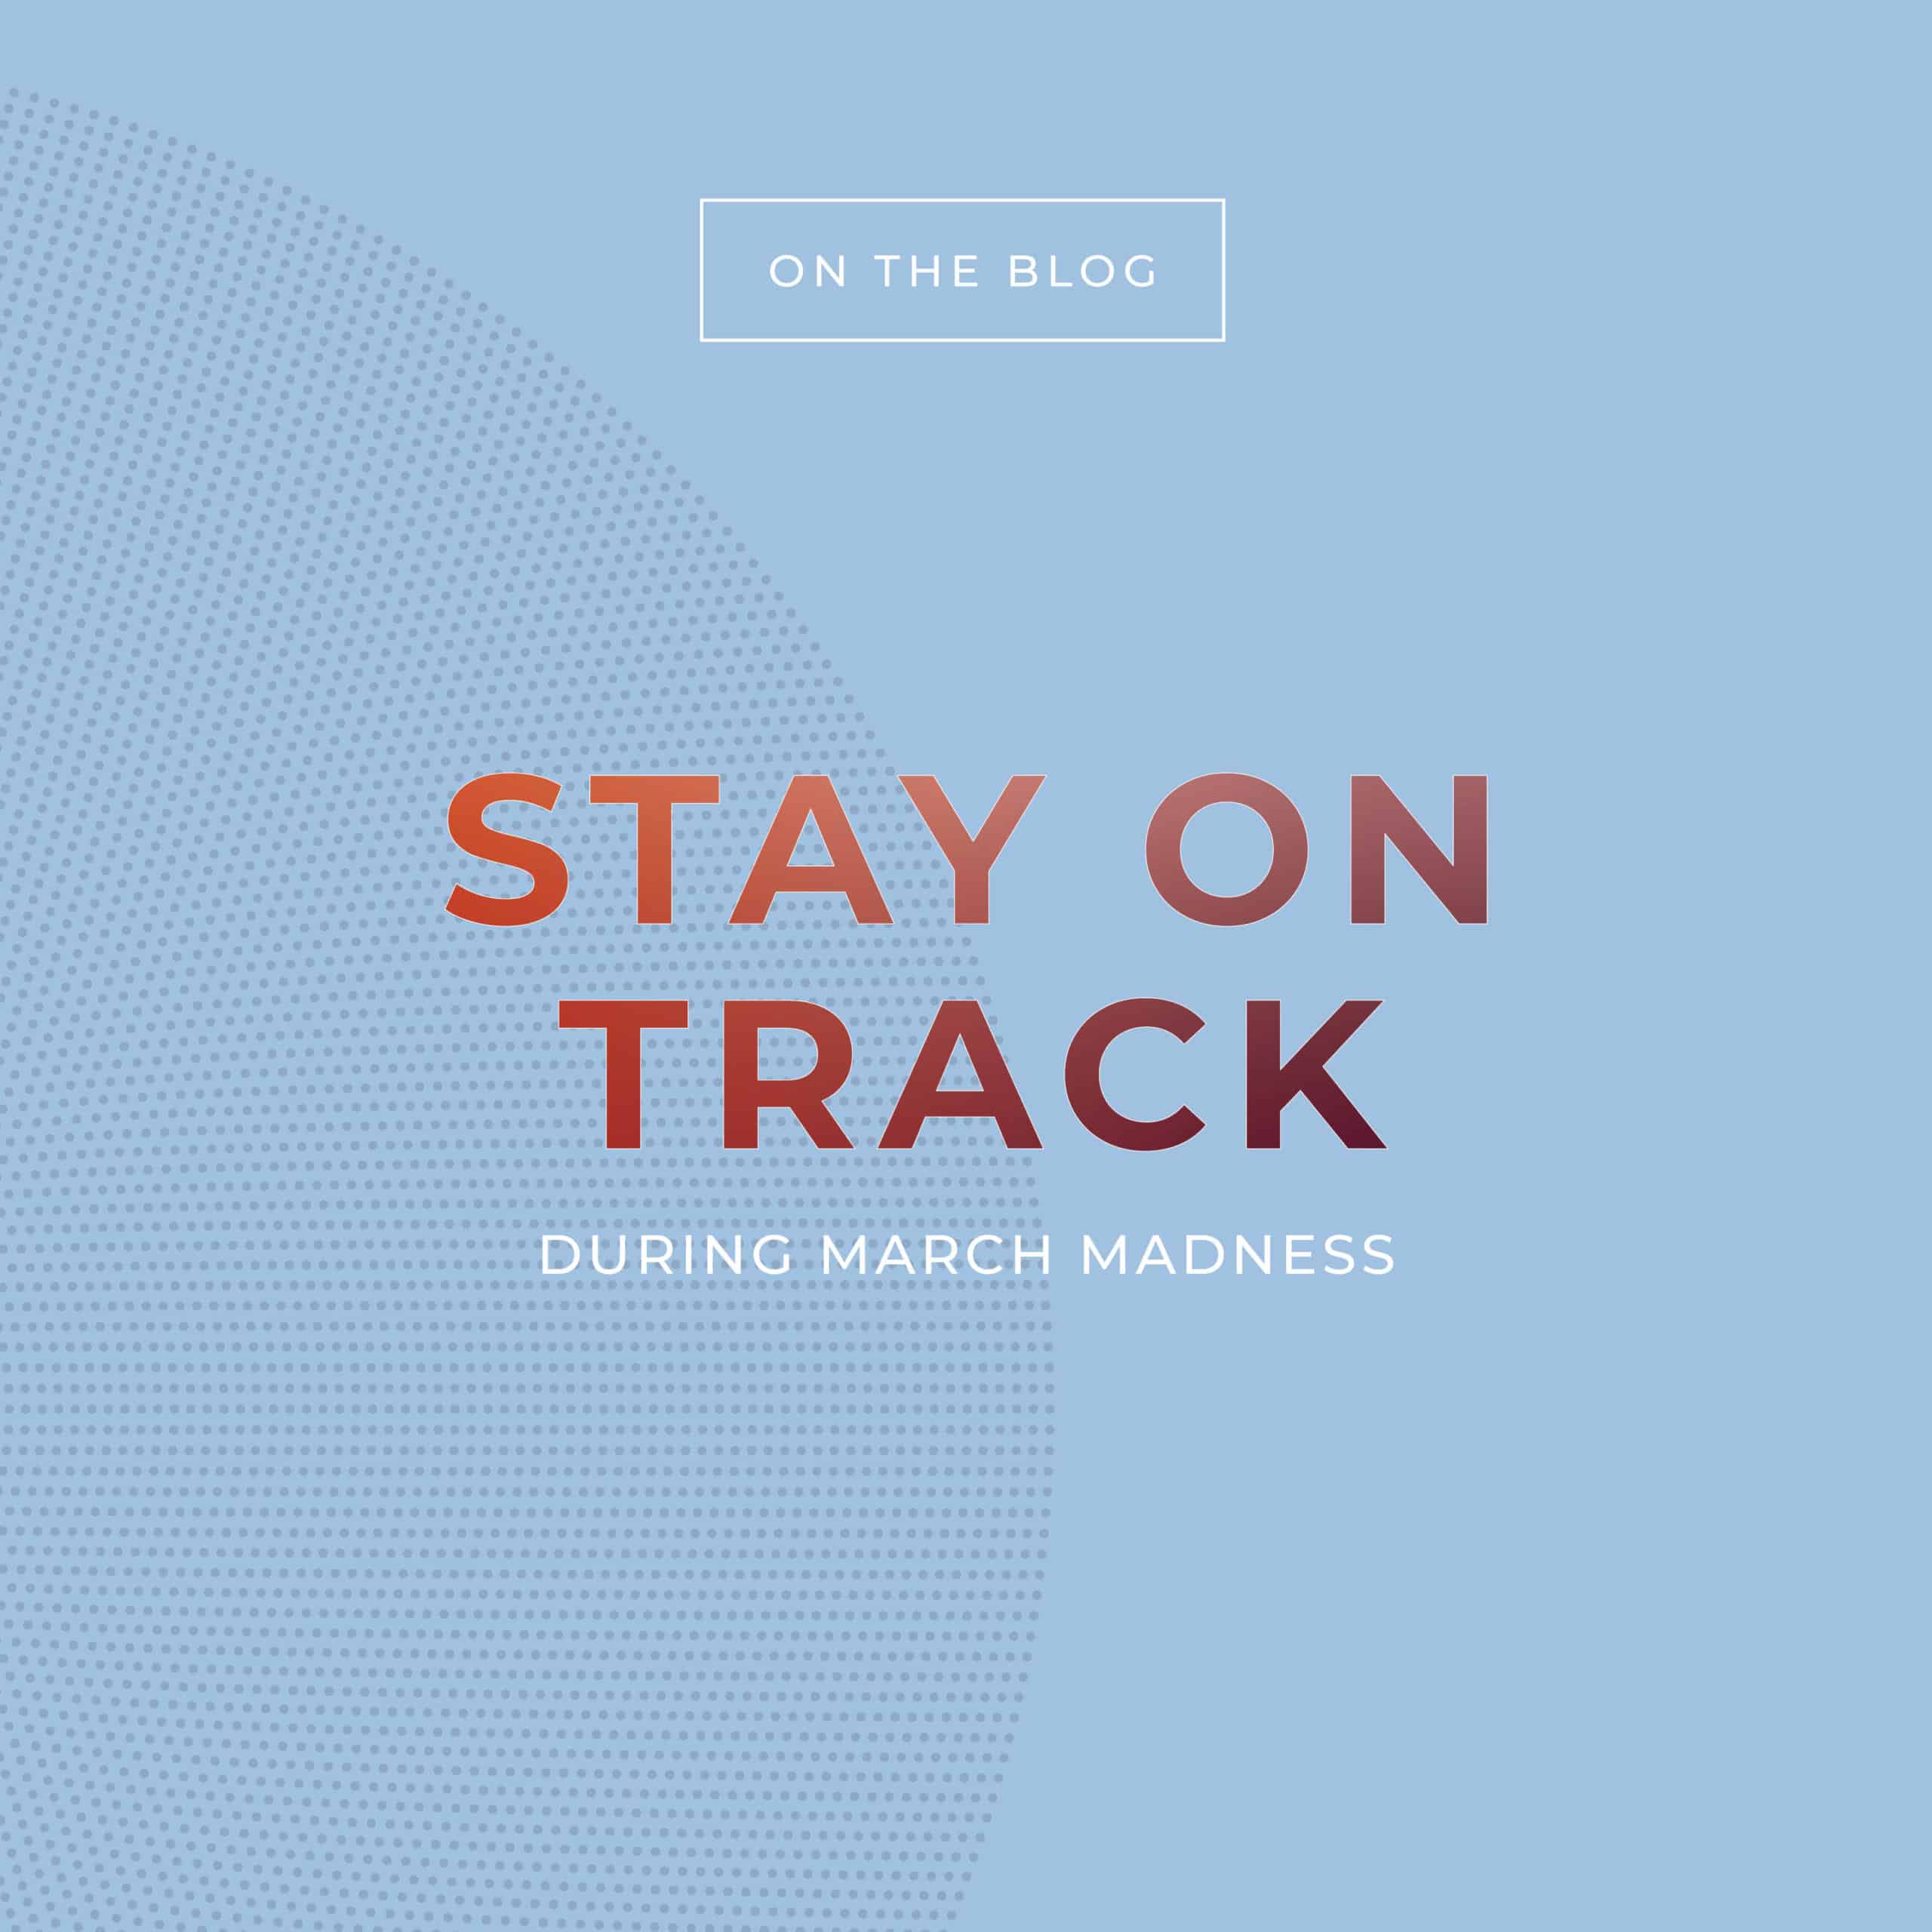 Stay On Track During March Madness